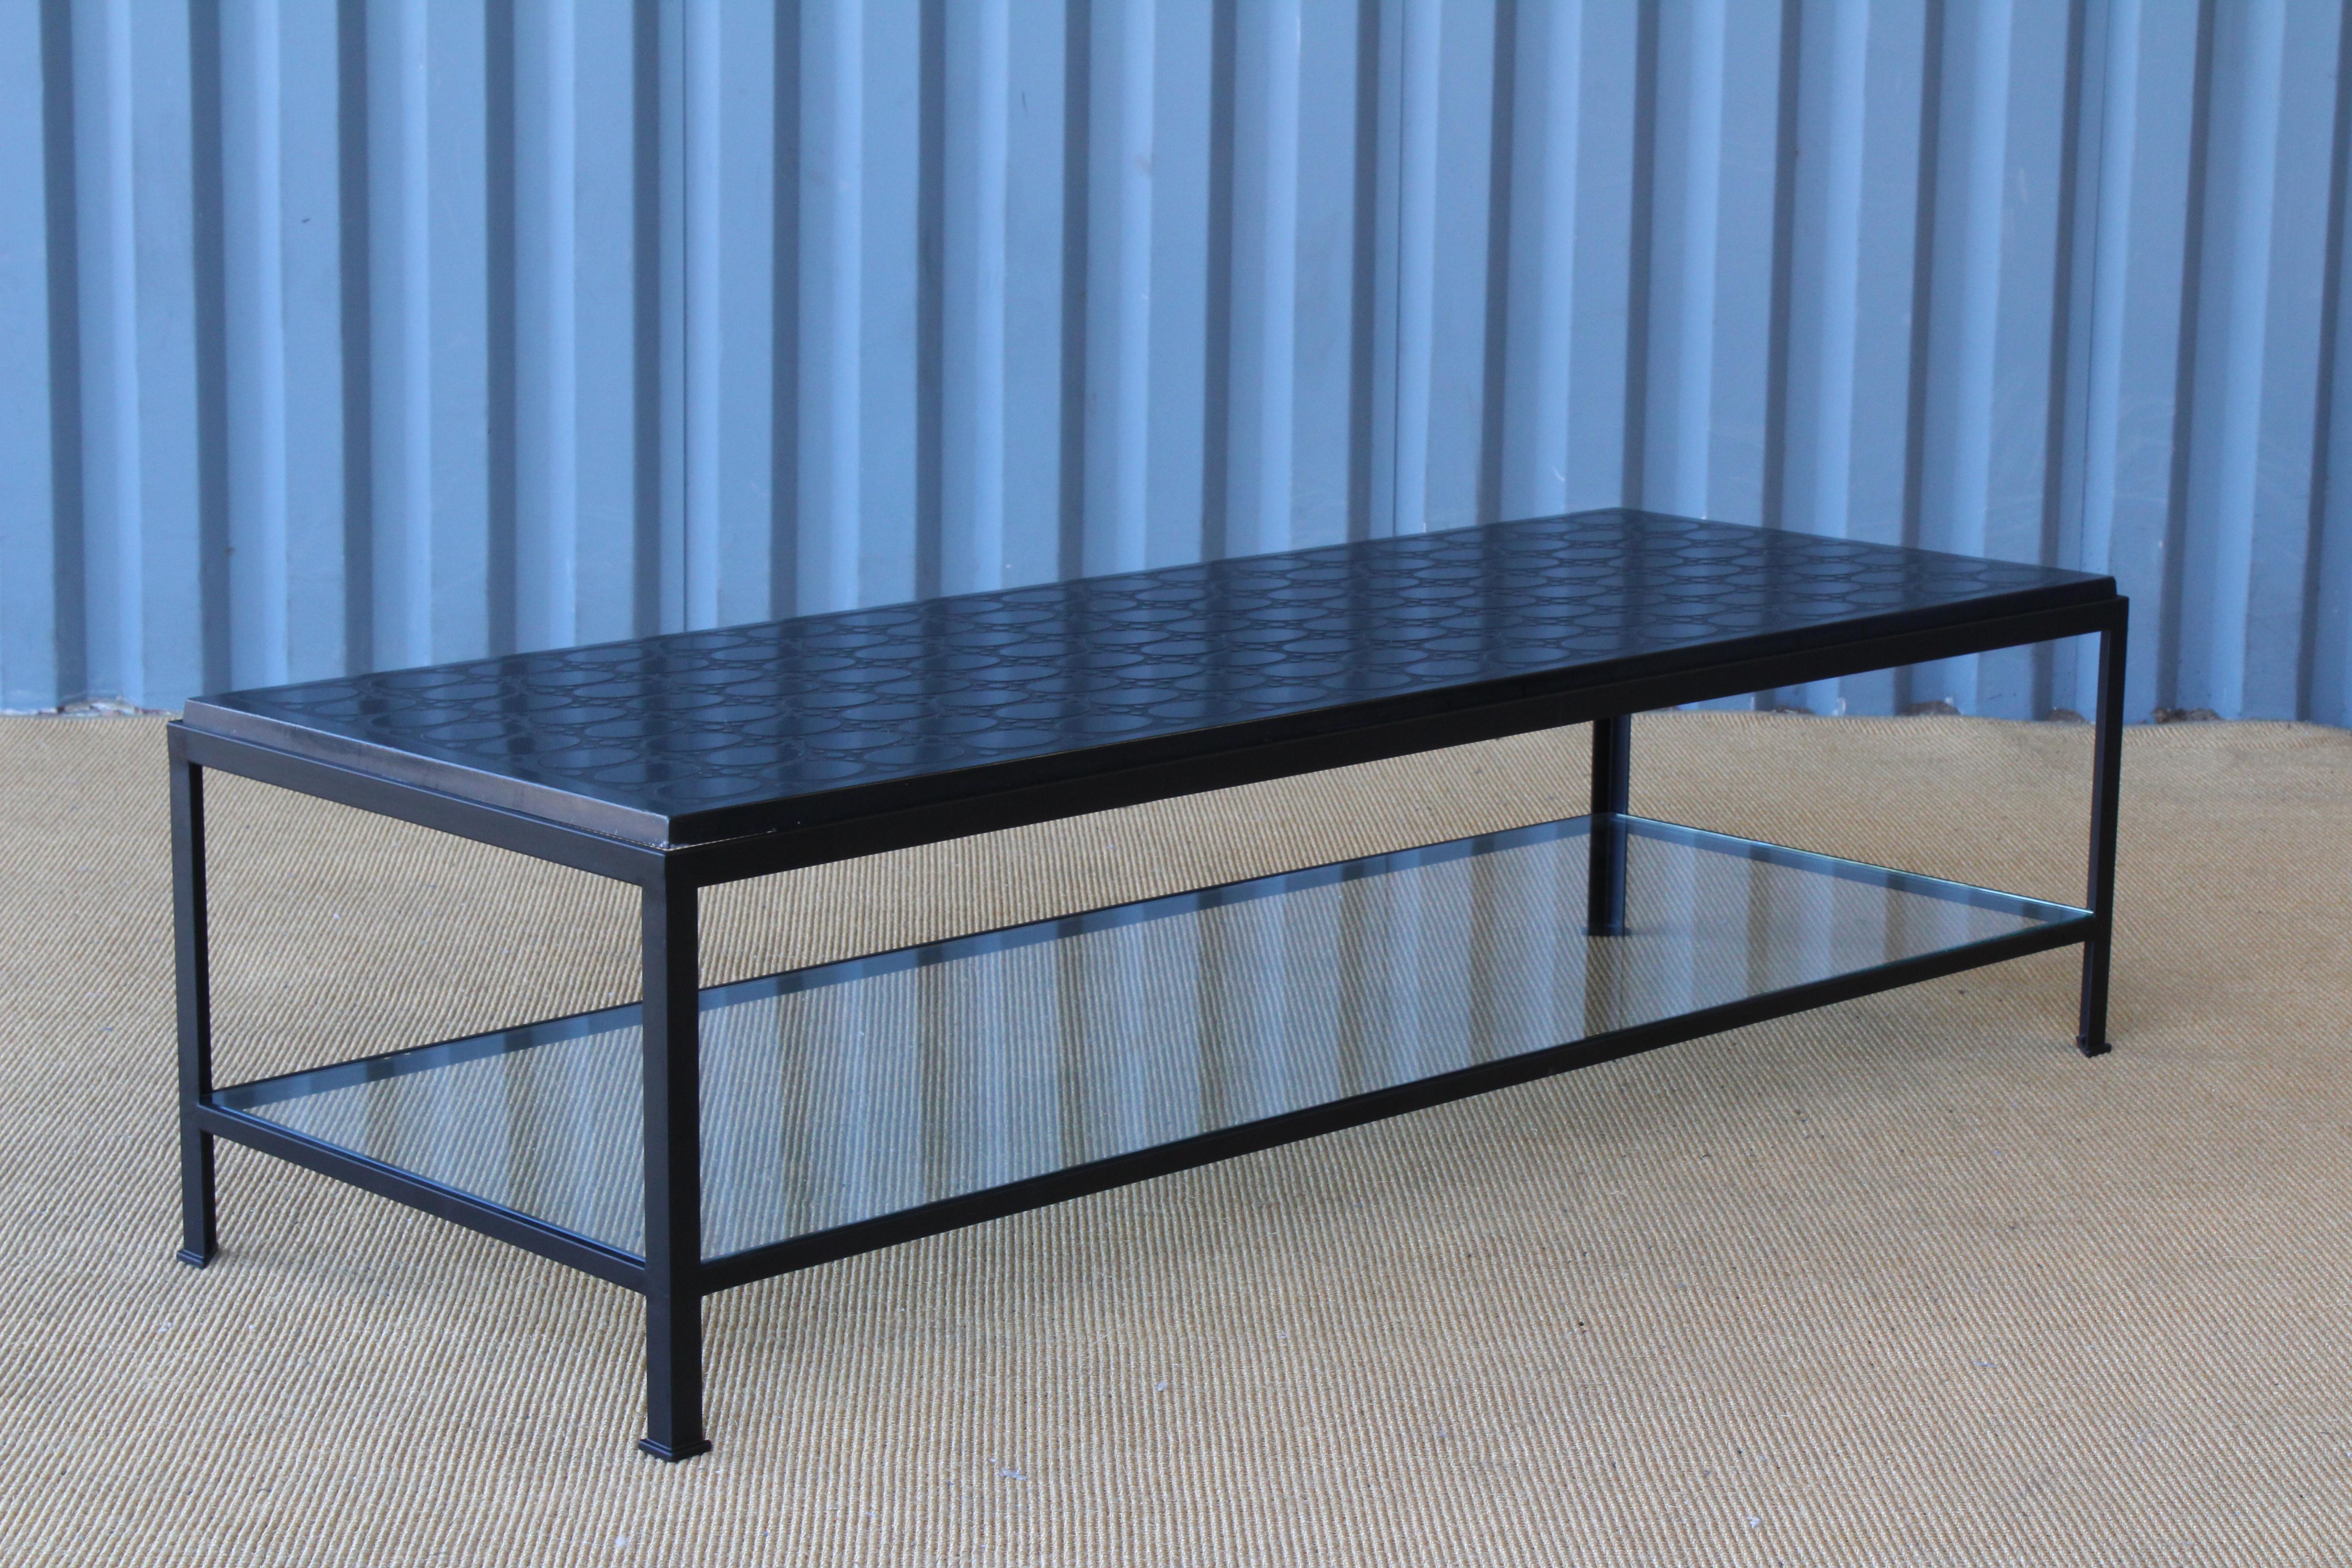 Vintage etched stone slab from France, 1950s recreated into a custom made steel base coffee table. Base is new, made to fit and recently professionally powder-coated in black. Includes a tempered glass bottom shelf. Stone surface is vintage and is